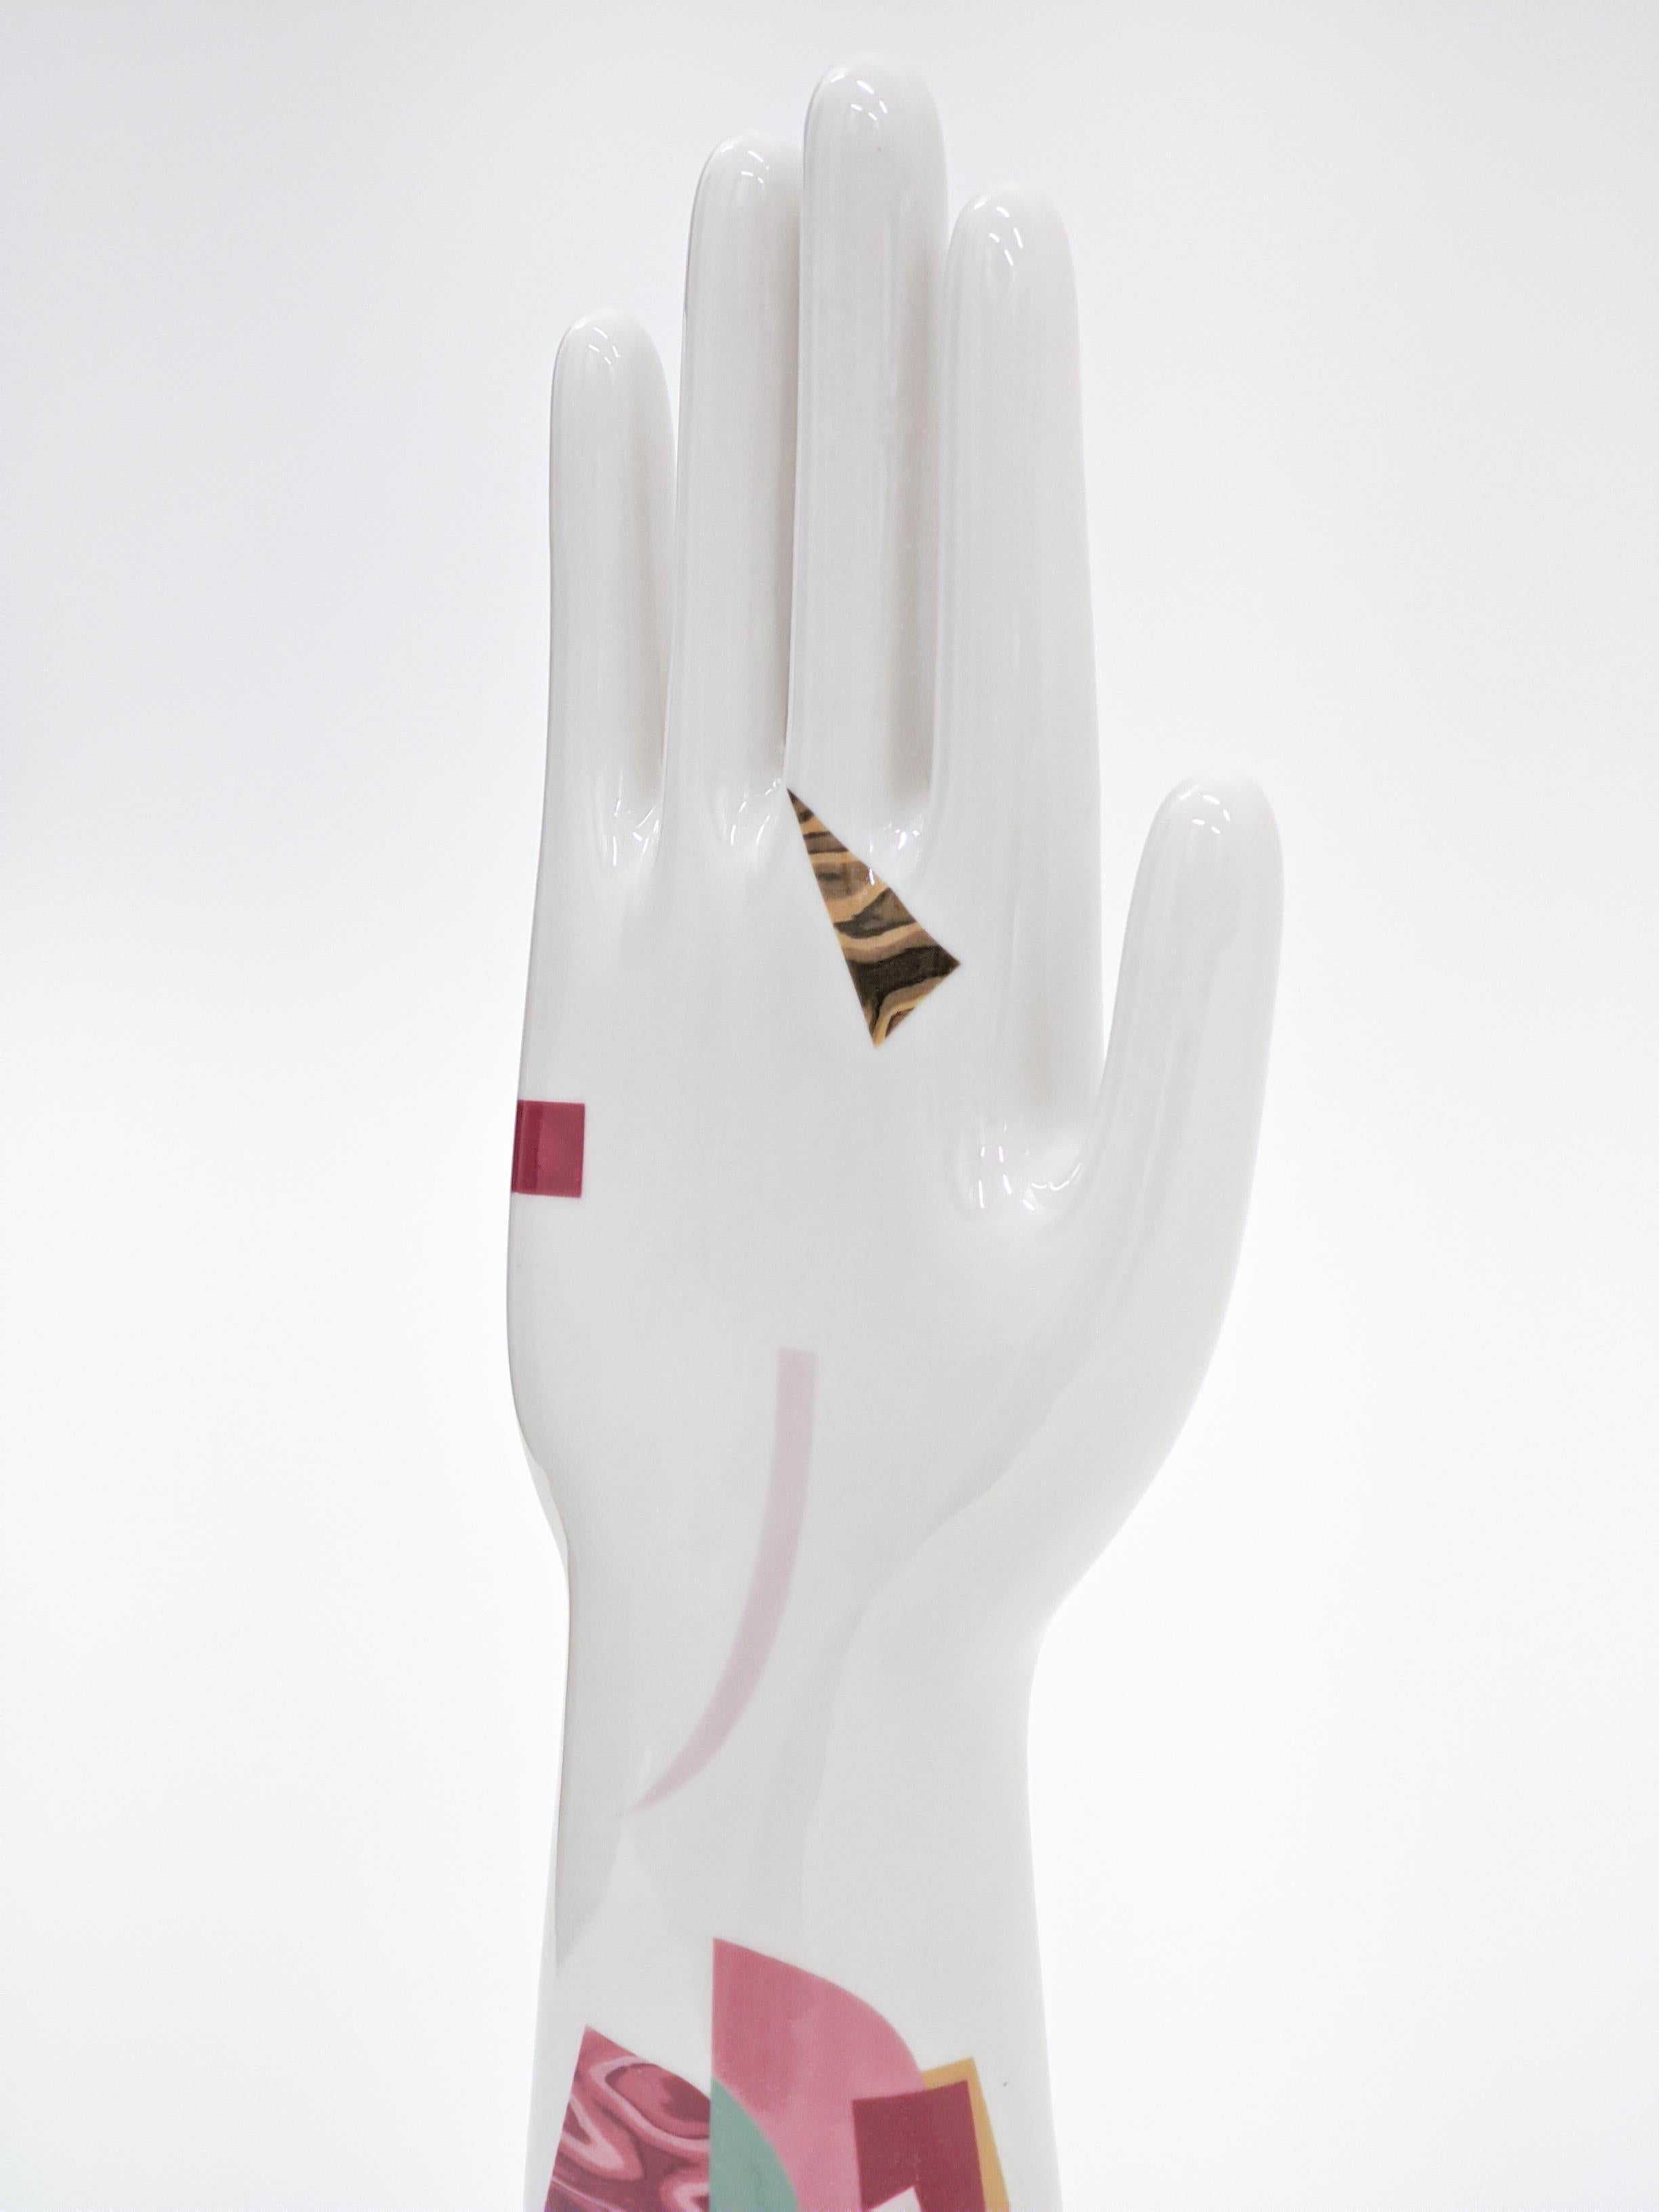 Anatomica, Porcelain Hand with Alchimie Decoration by Vito Nesta In New Condition For Sale In Milano, Lombardia